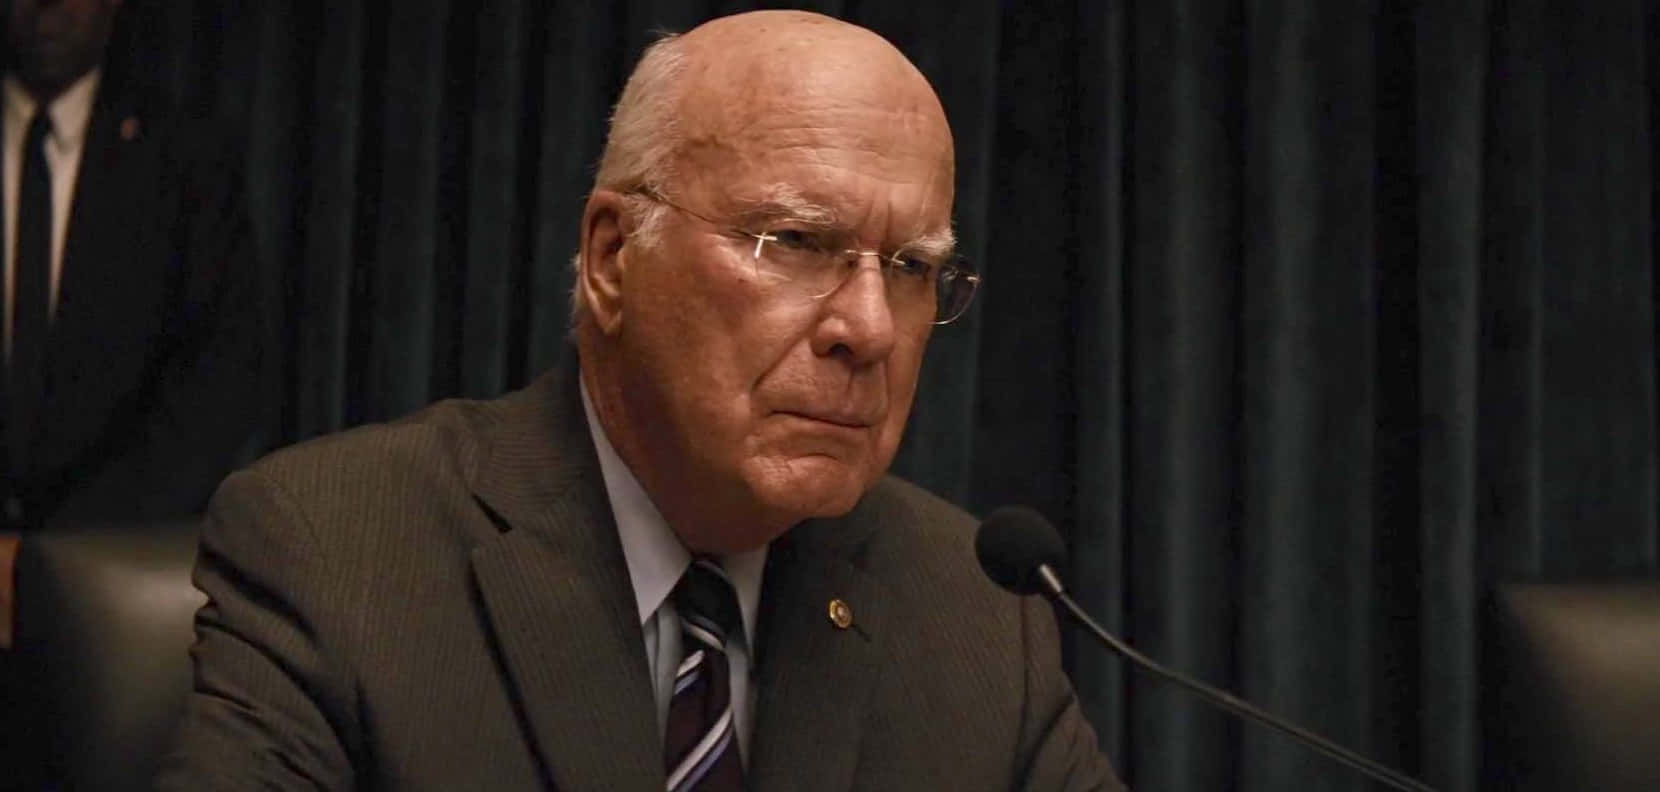 Patrick Leahy Serious And Focused Wallpaper